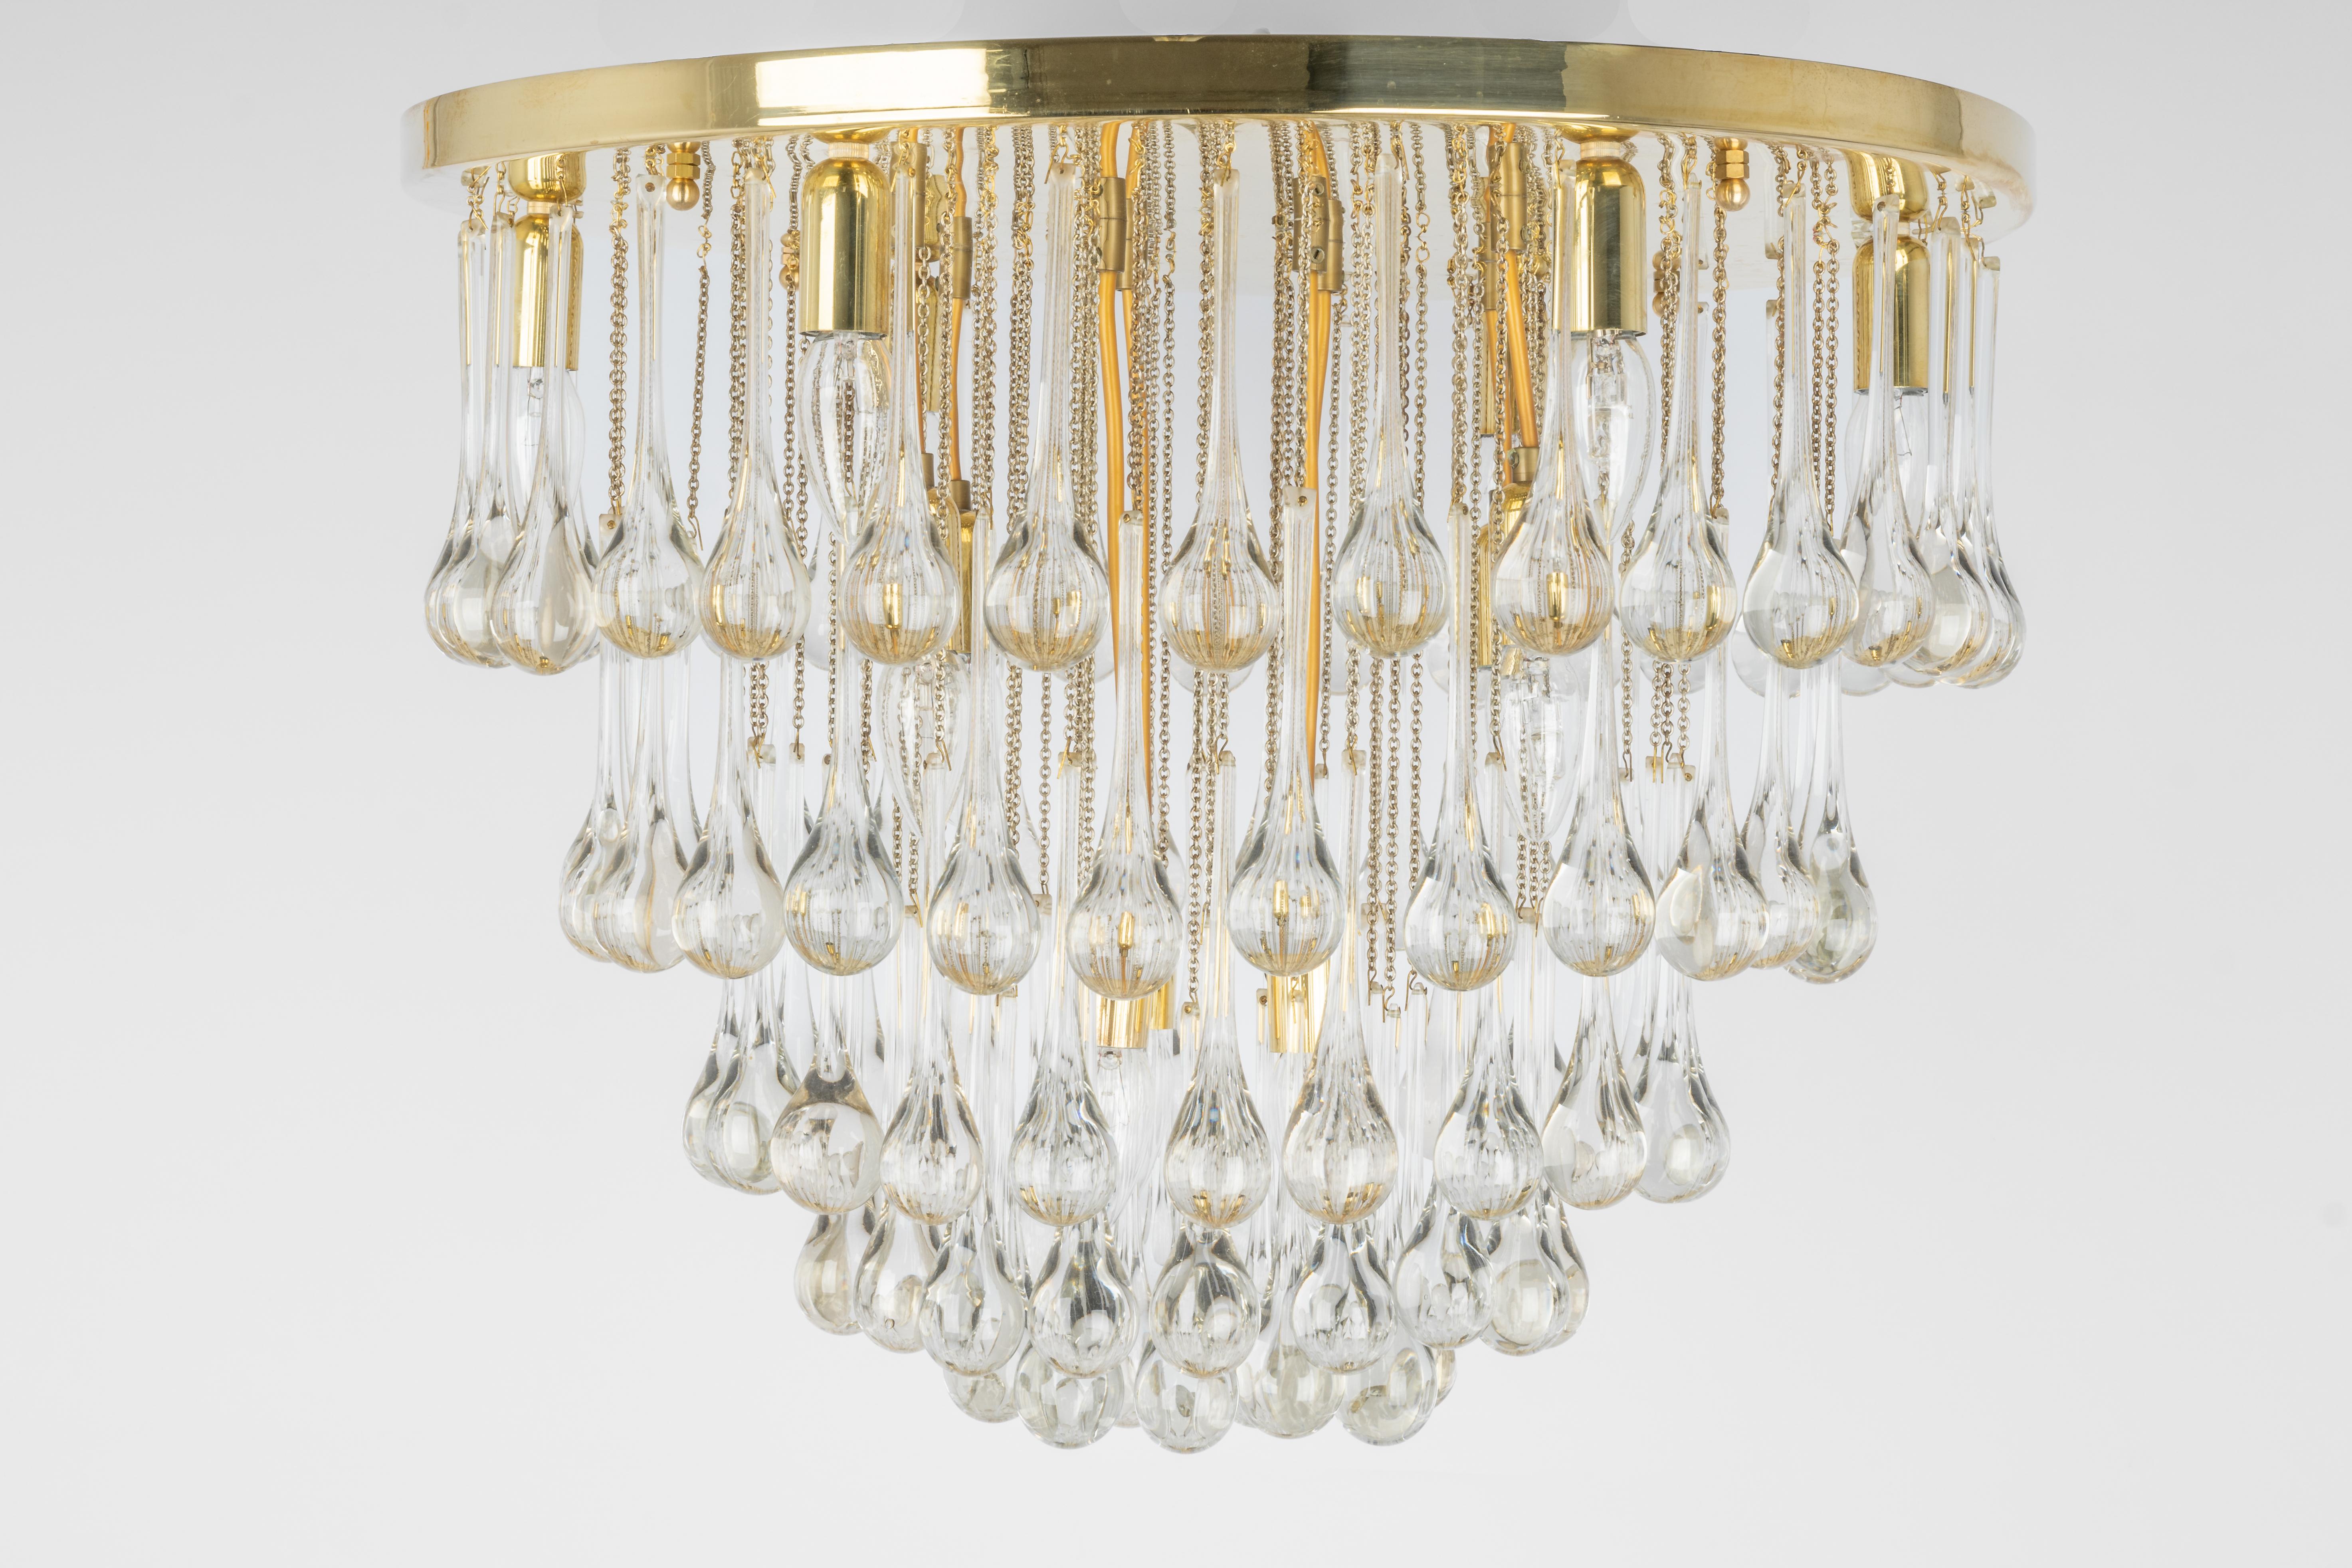 Stunning chandelier by Christoph Palme, Germany, manufactured in the 1970s. It’s composed of Murano teardrop glass pieces on a brass frame.
Wonderful light effect.
High quality and in good condition. Cleaned, well-wired, and ready to use. 

Each